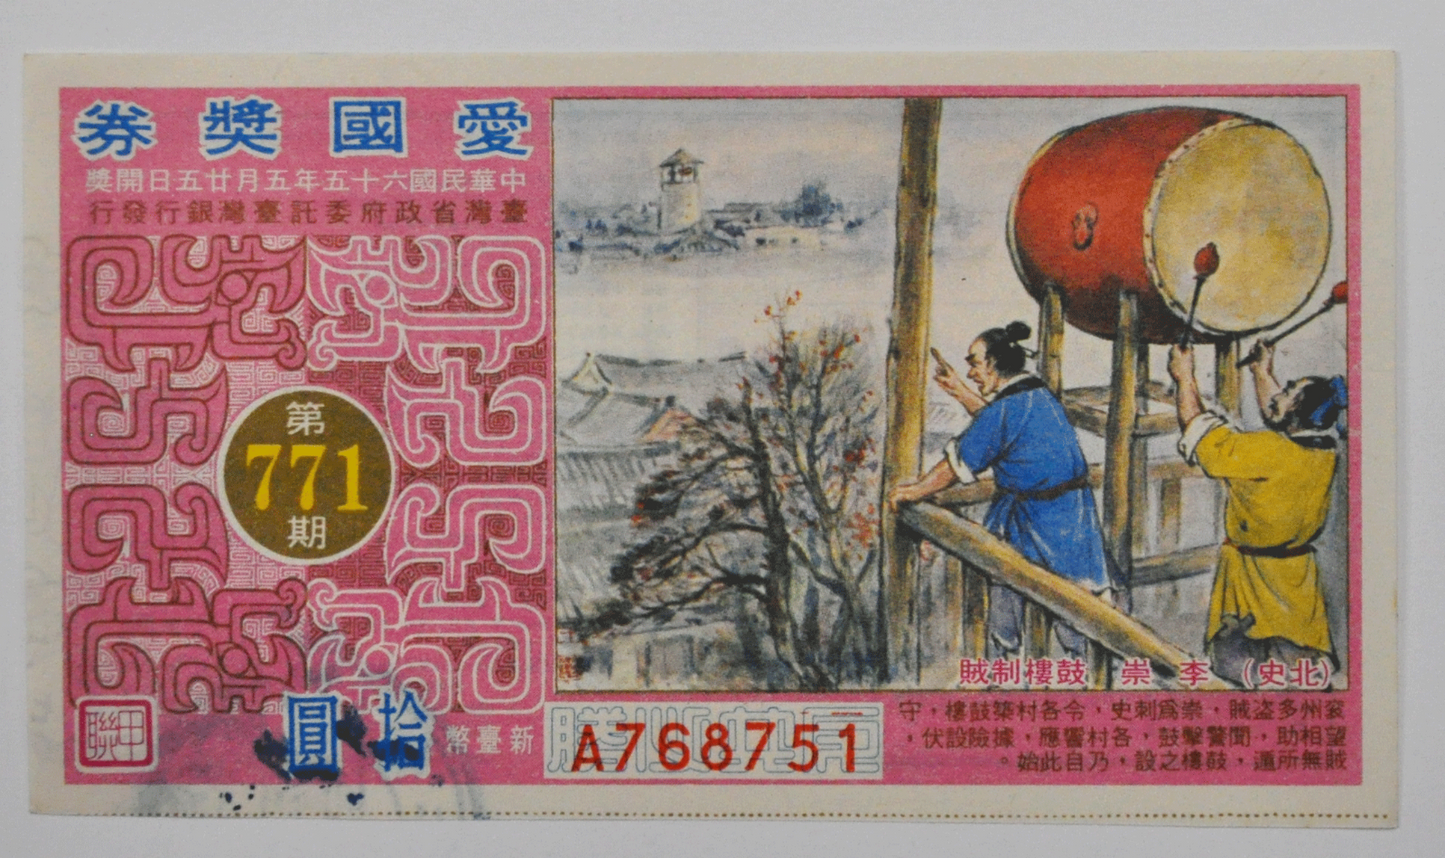 1970's Vintage Taiwan 10 Yuan Lottery Ticket Rare 771 A768751 Uncirculated